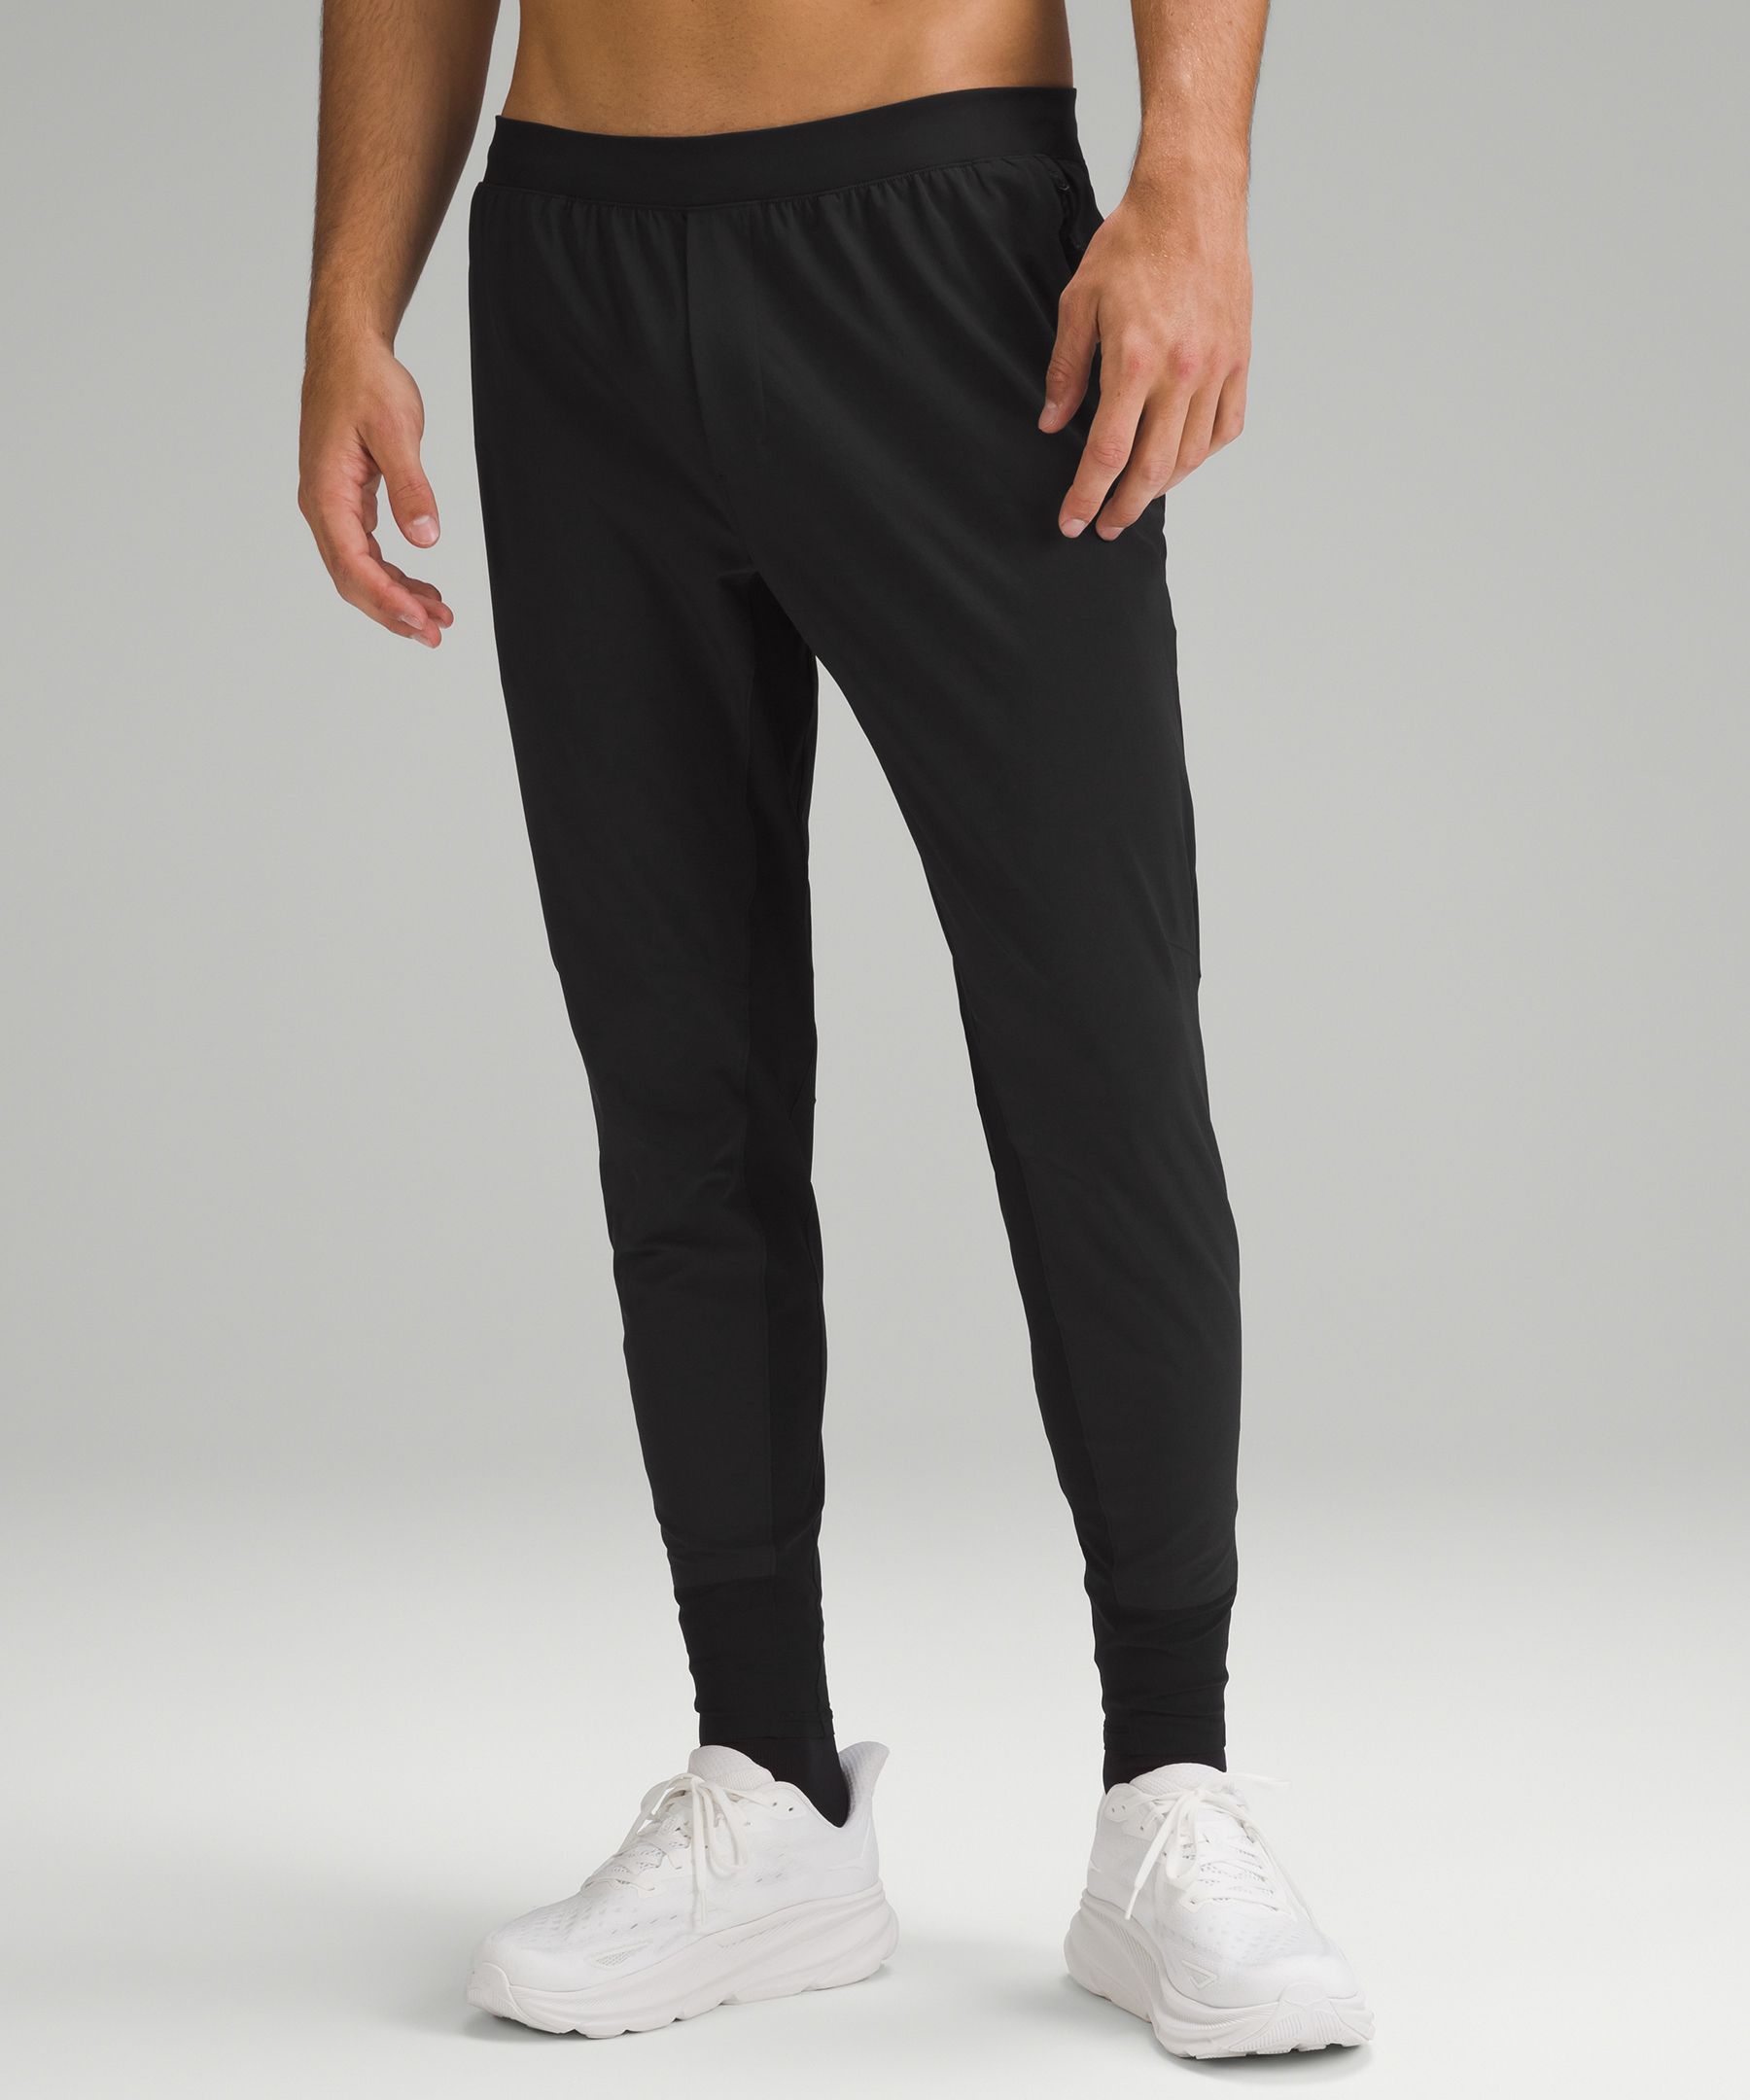 City Sweat Slim-Fit Tapered French Terry Sweatpants